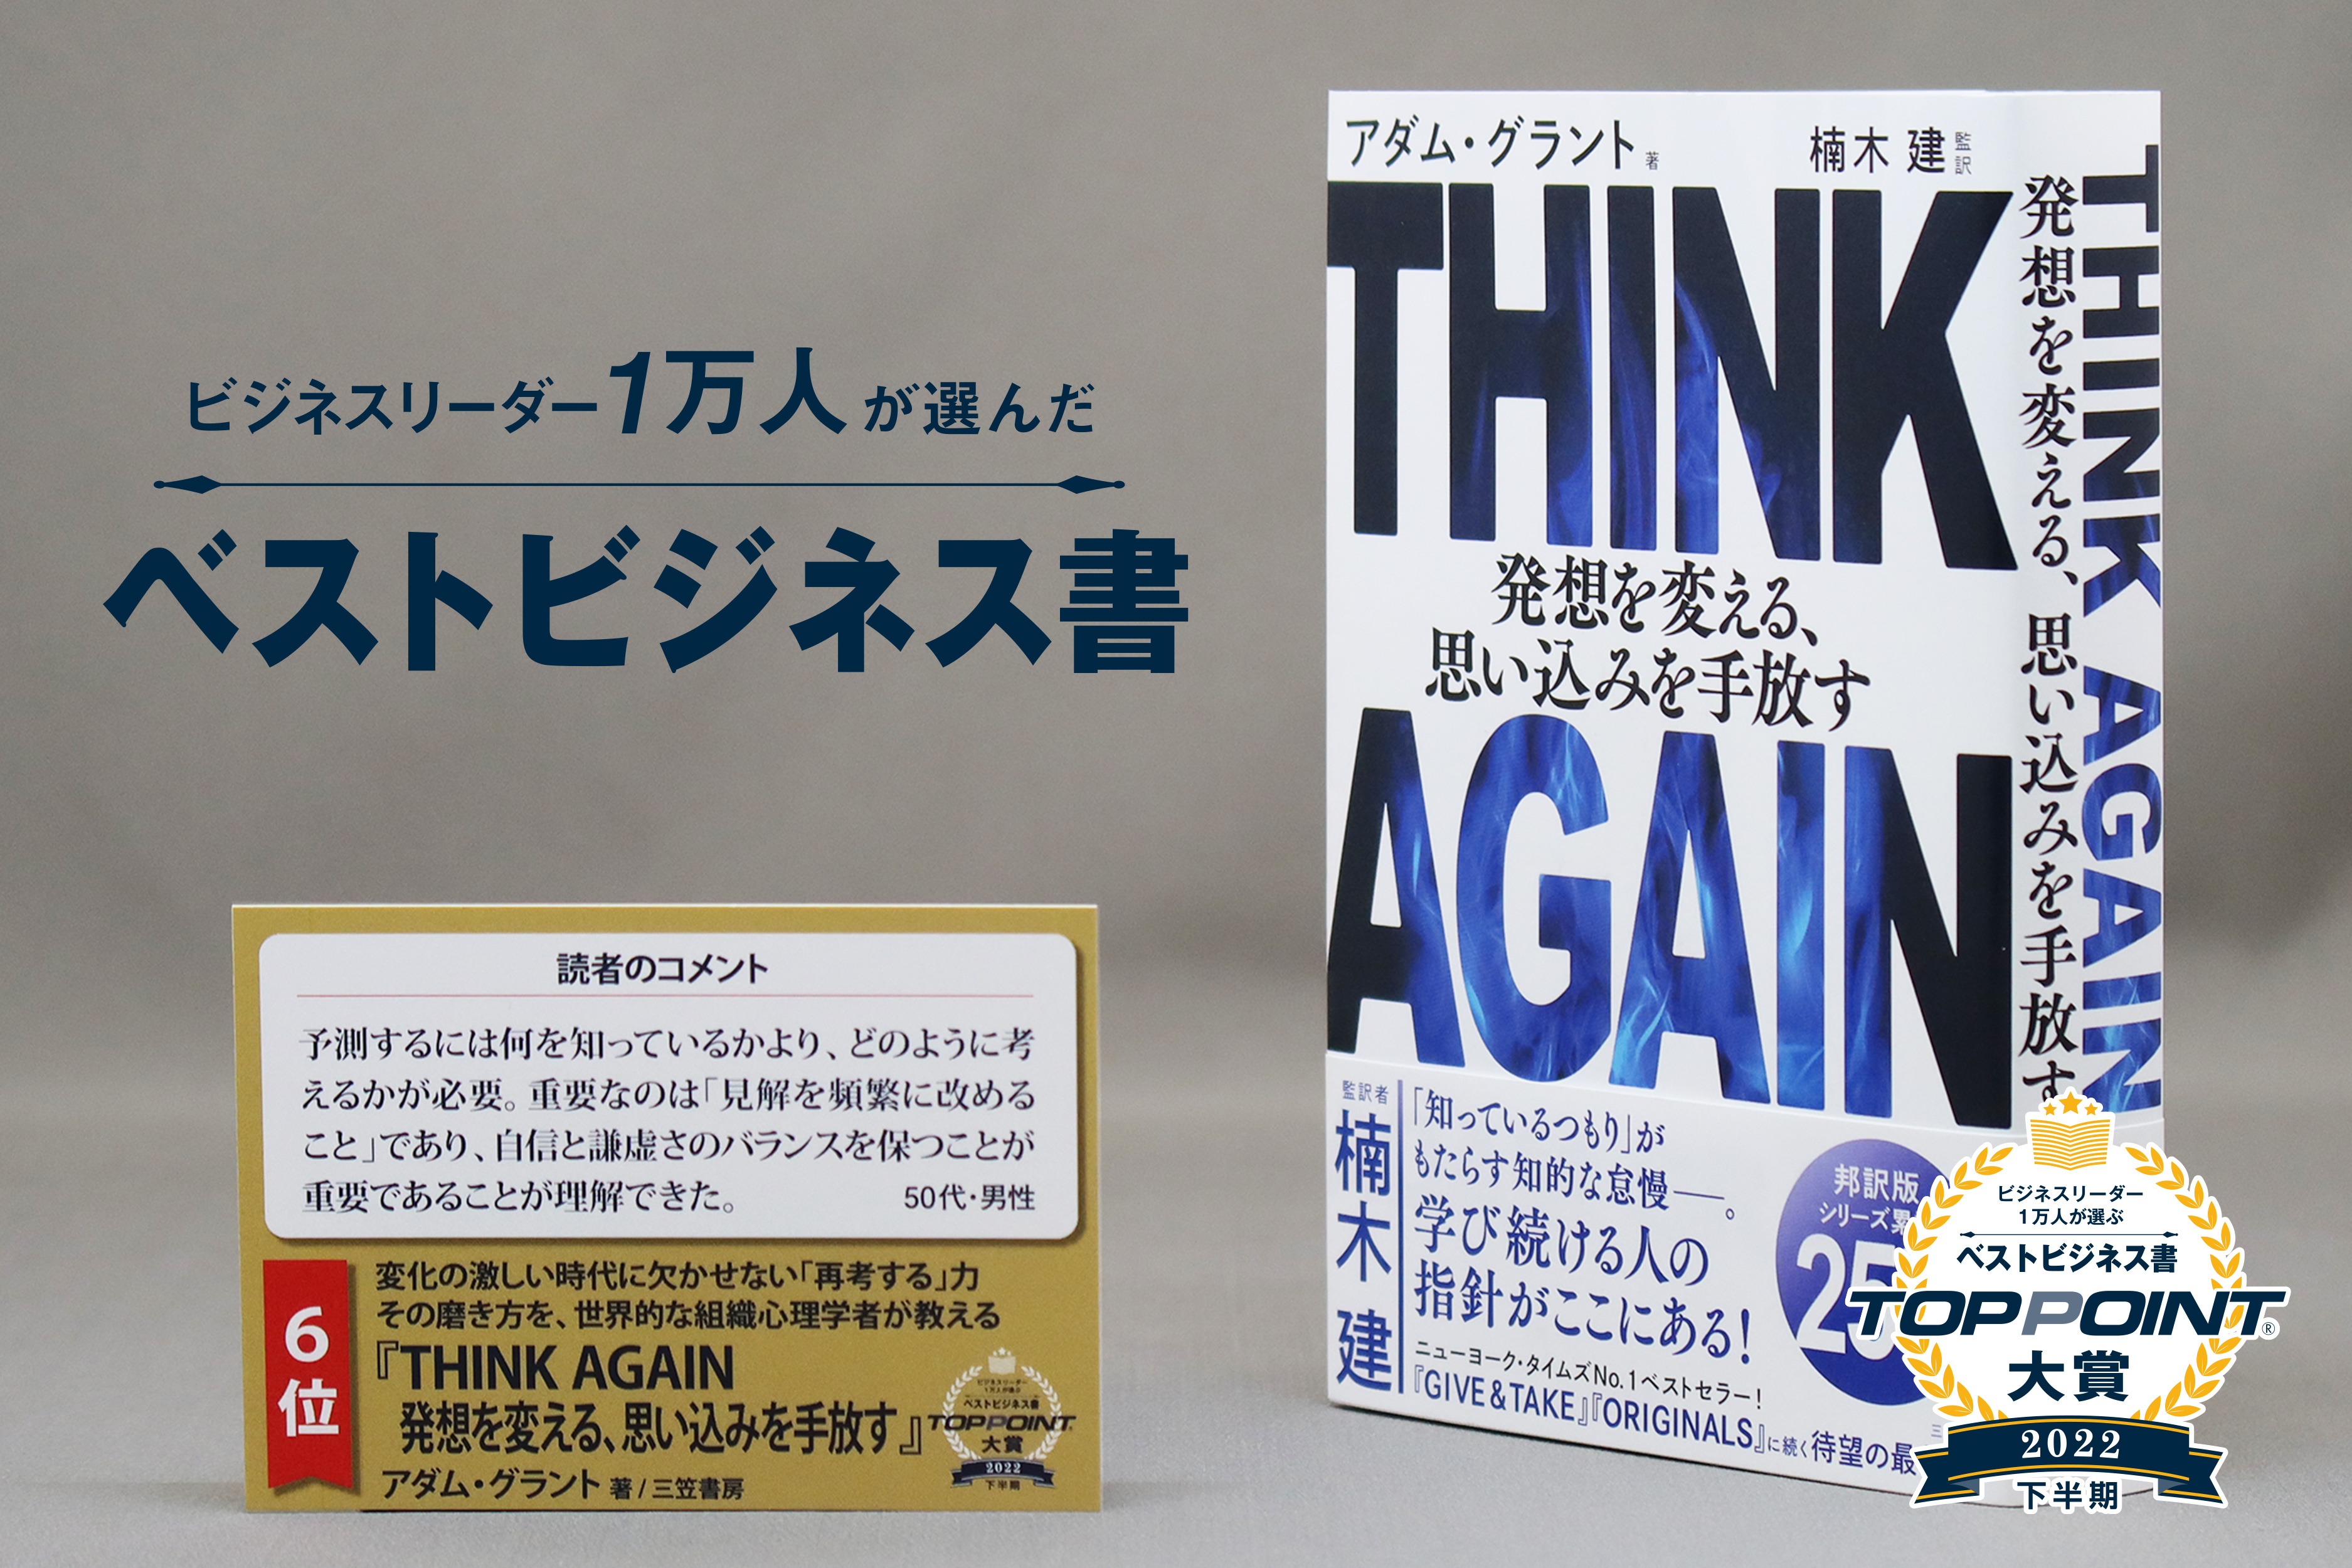 THINK AGAIN（シンク アゲイン）　発想を変える、思い込みを手放す